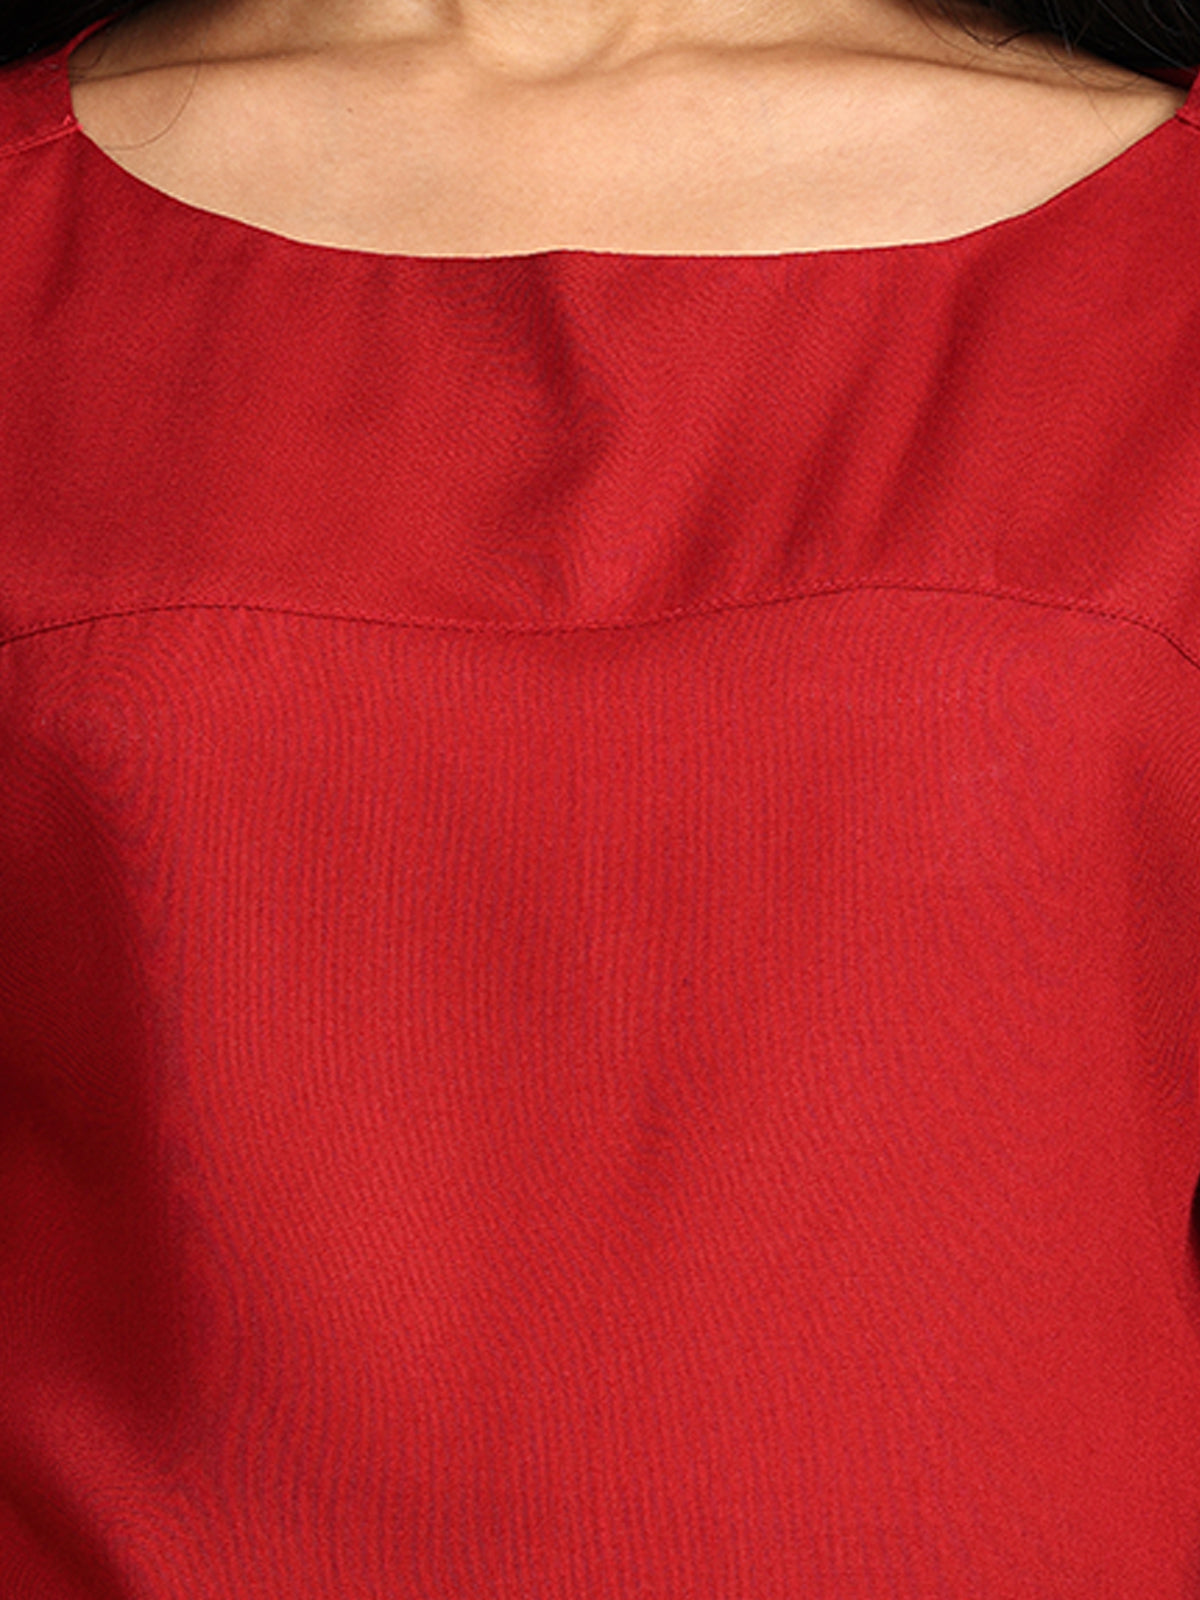 Find Boat Neck Red Woven Top Online